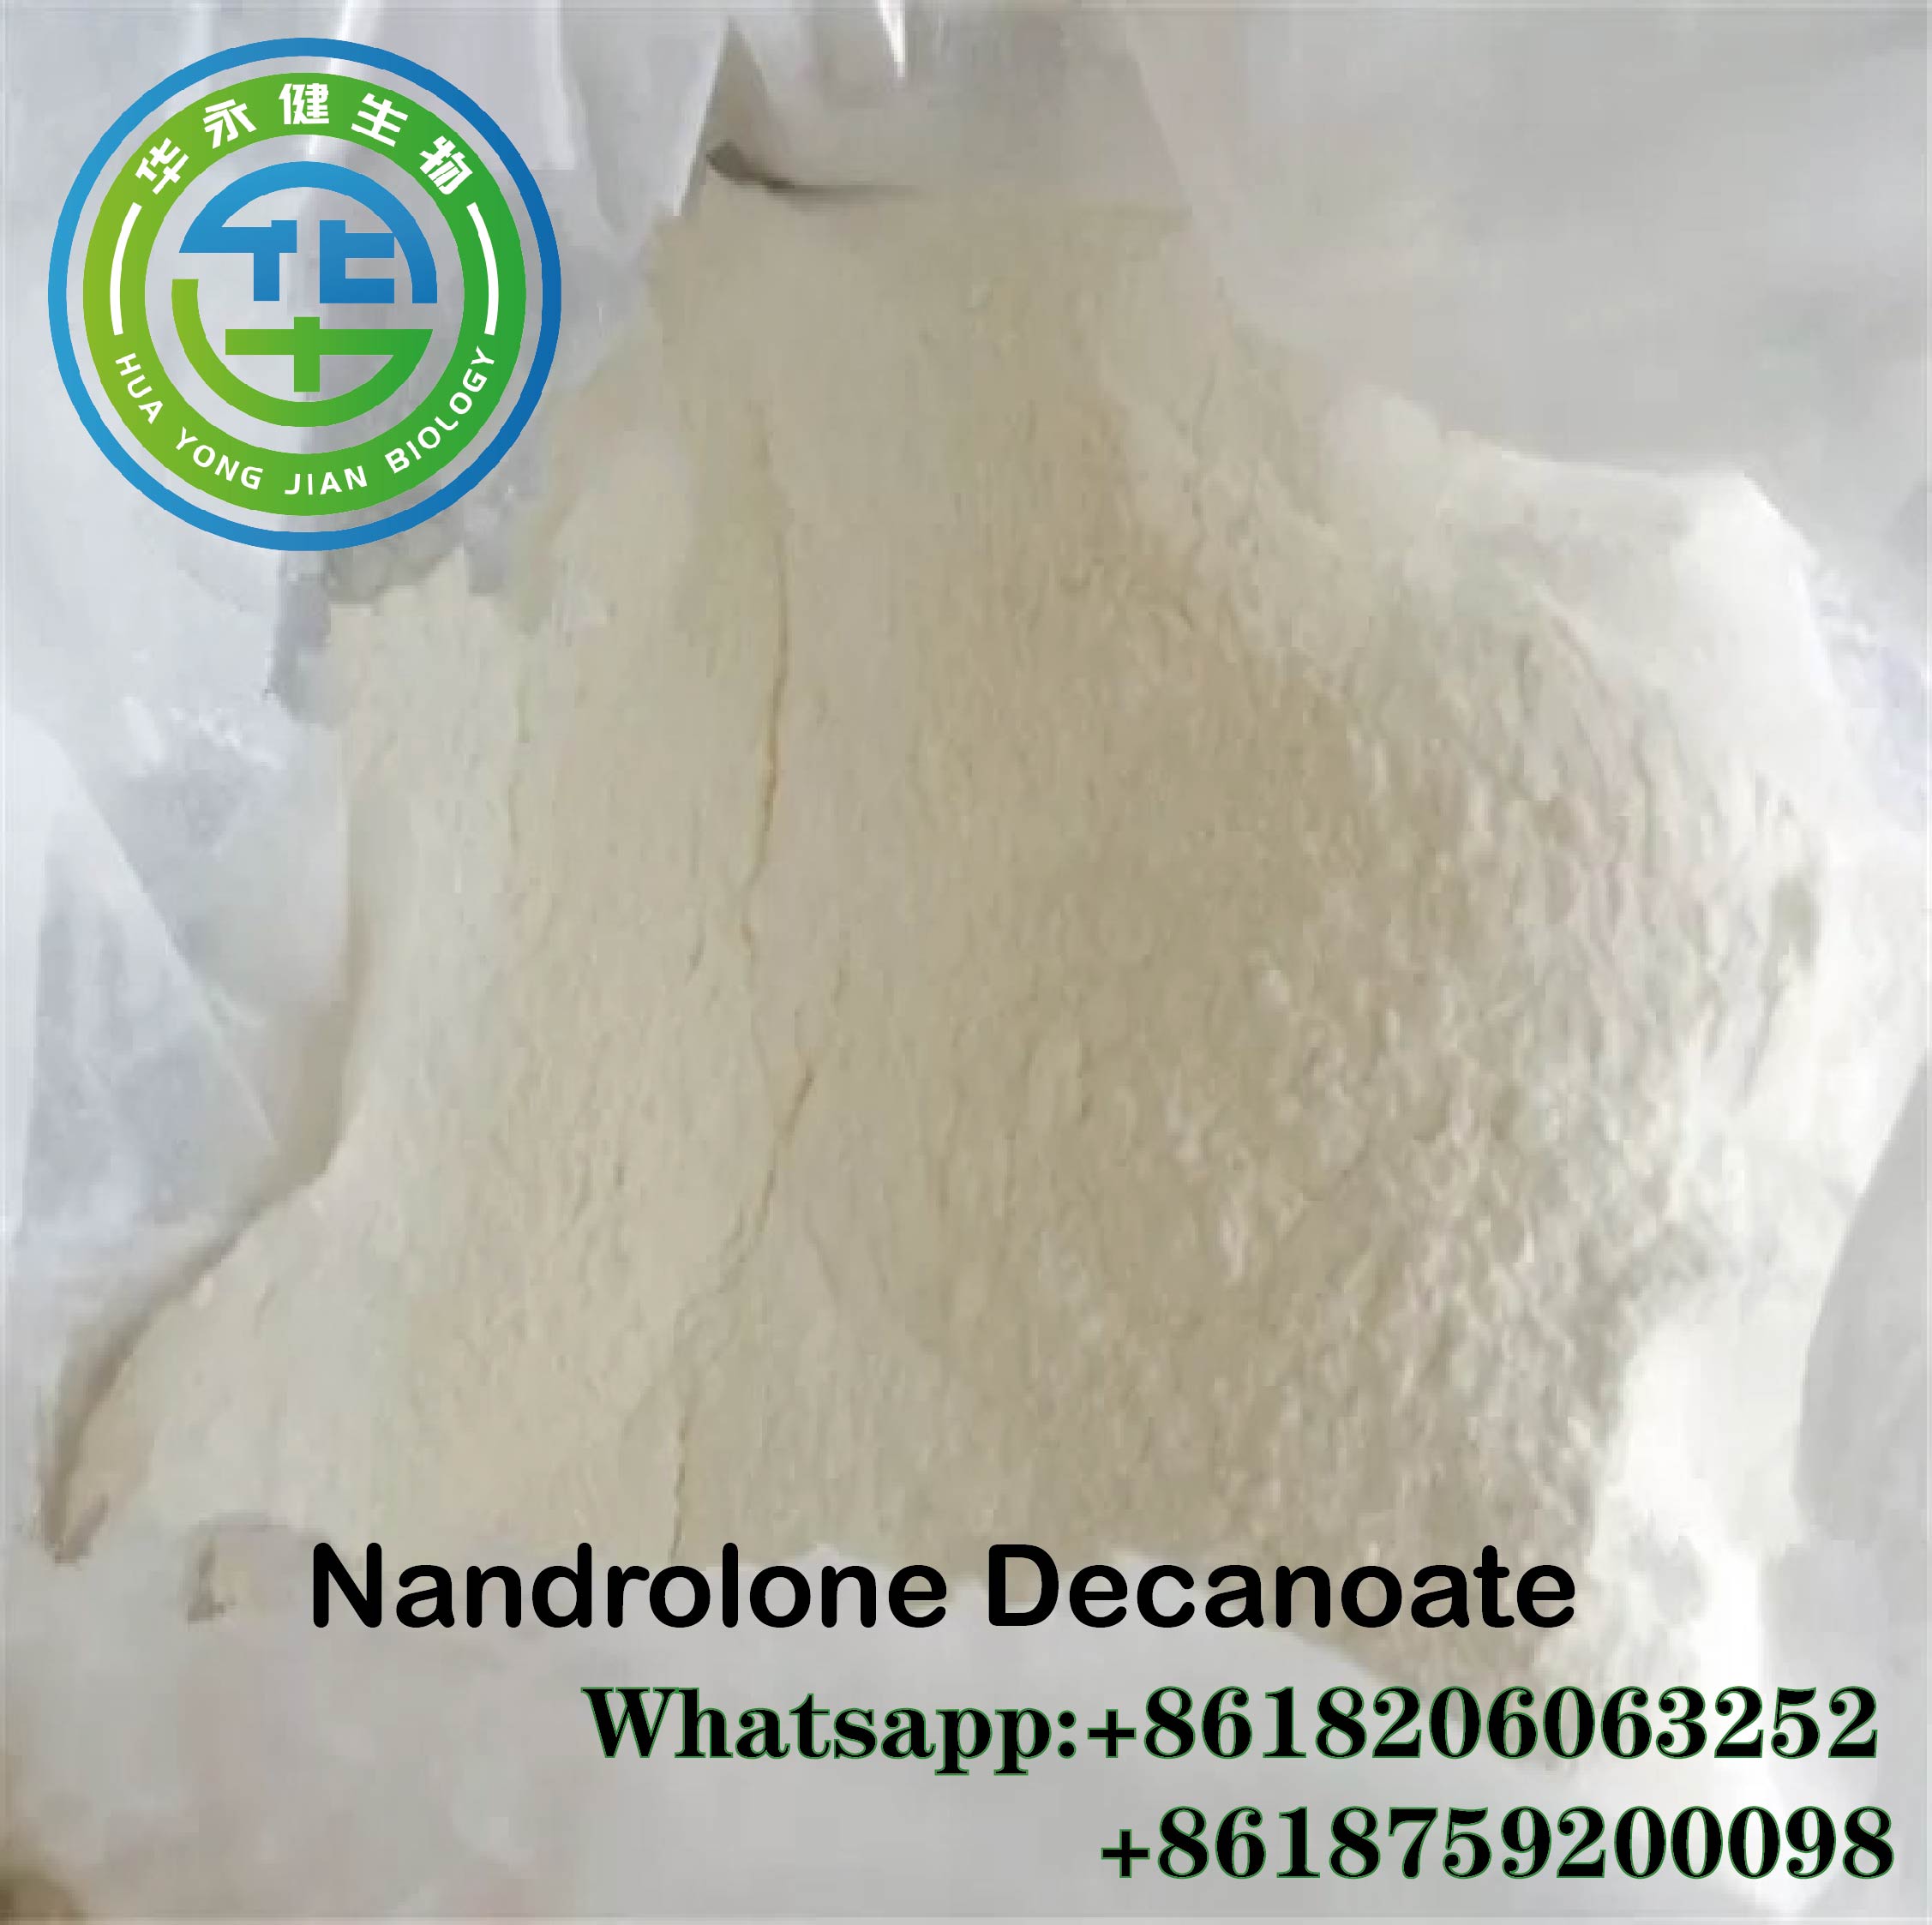 Strong Anabolic Steroid Nandrolone Decanoate Powder 99.3% USP33 DECA Powder